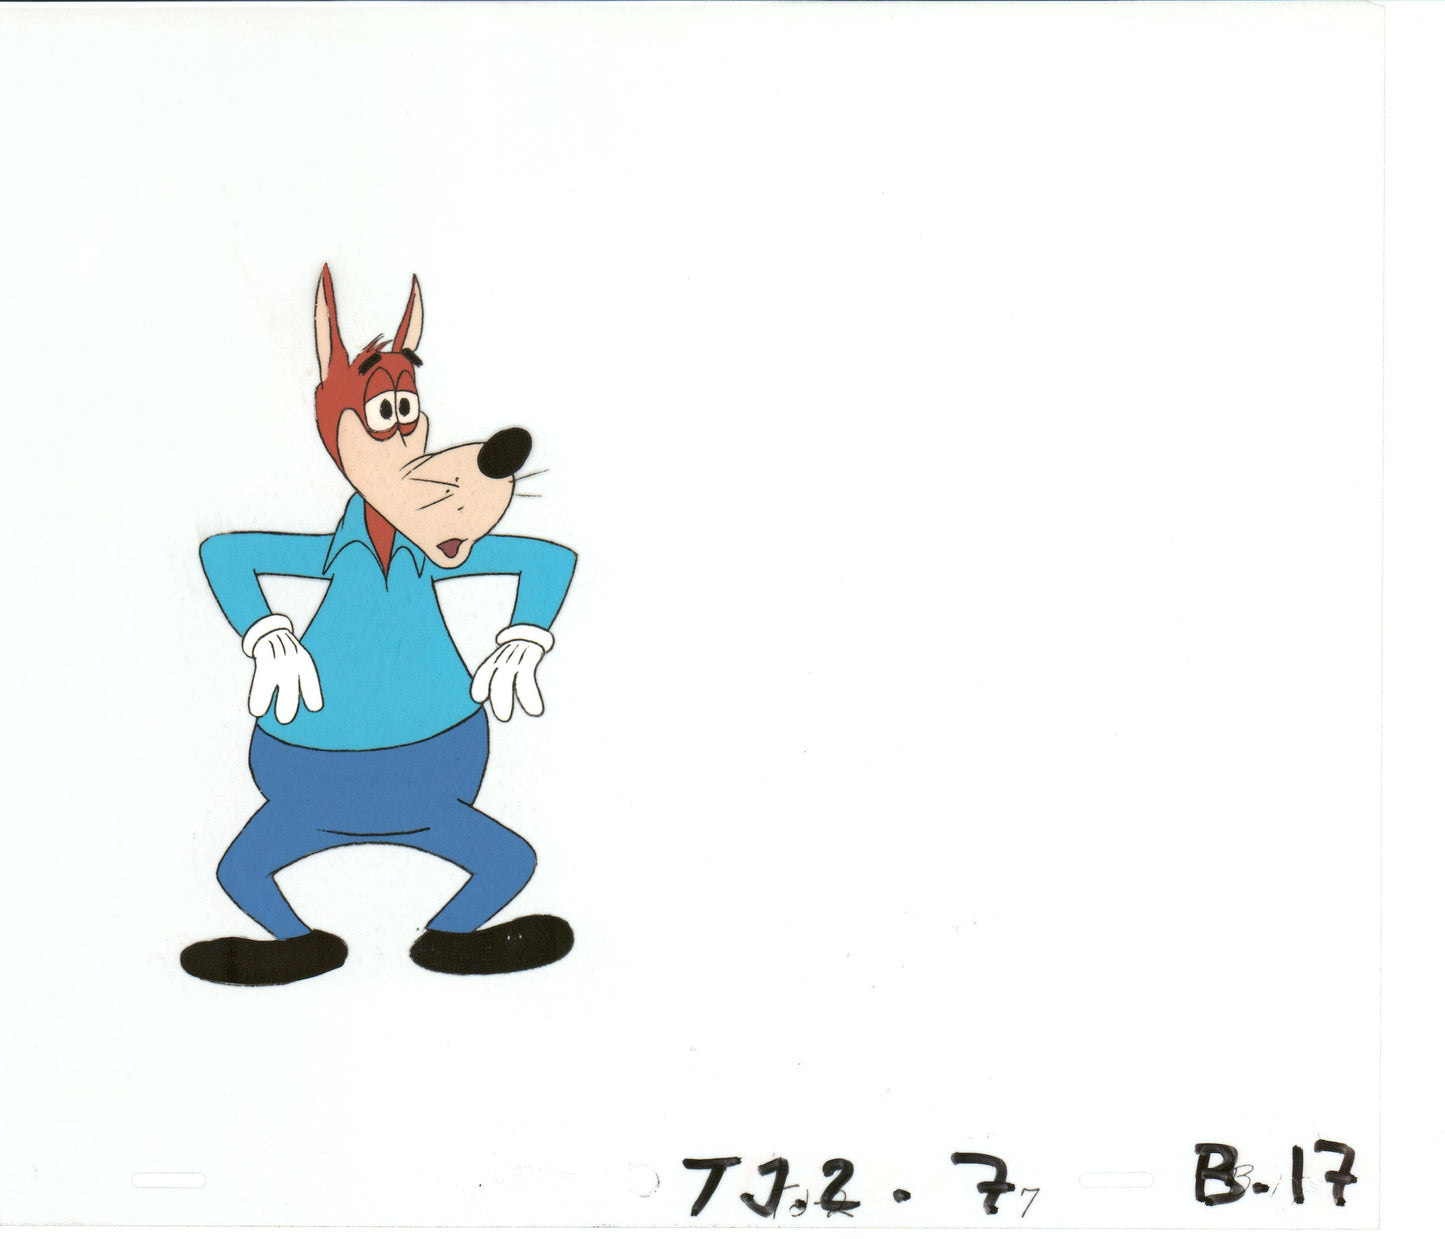 Tom & Jerry Original Production Animation Cel from Filmation 1980-82 b4377